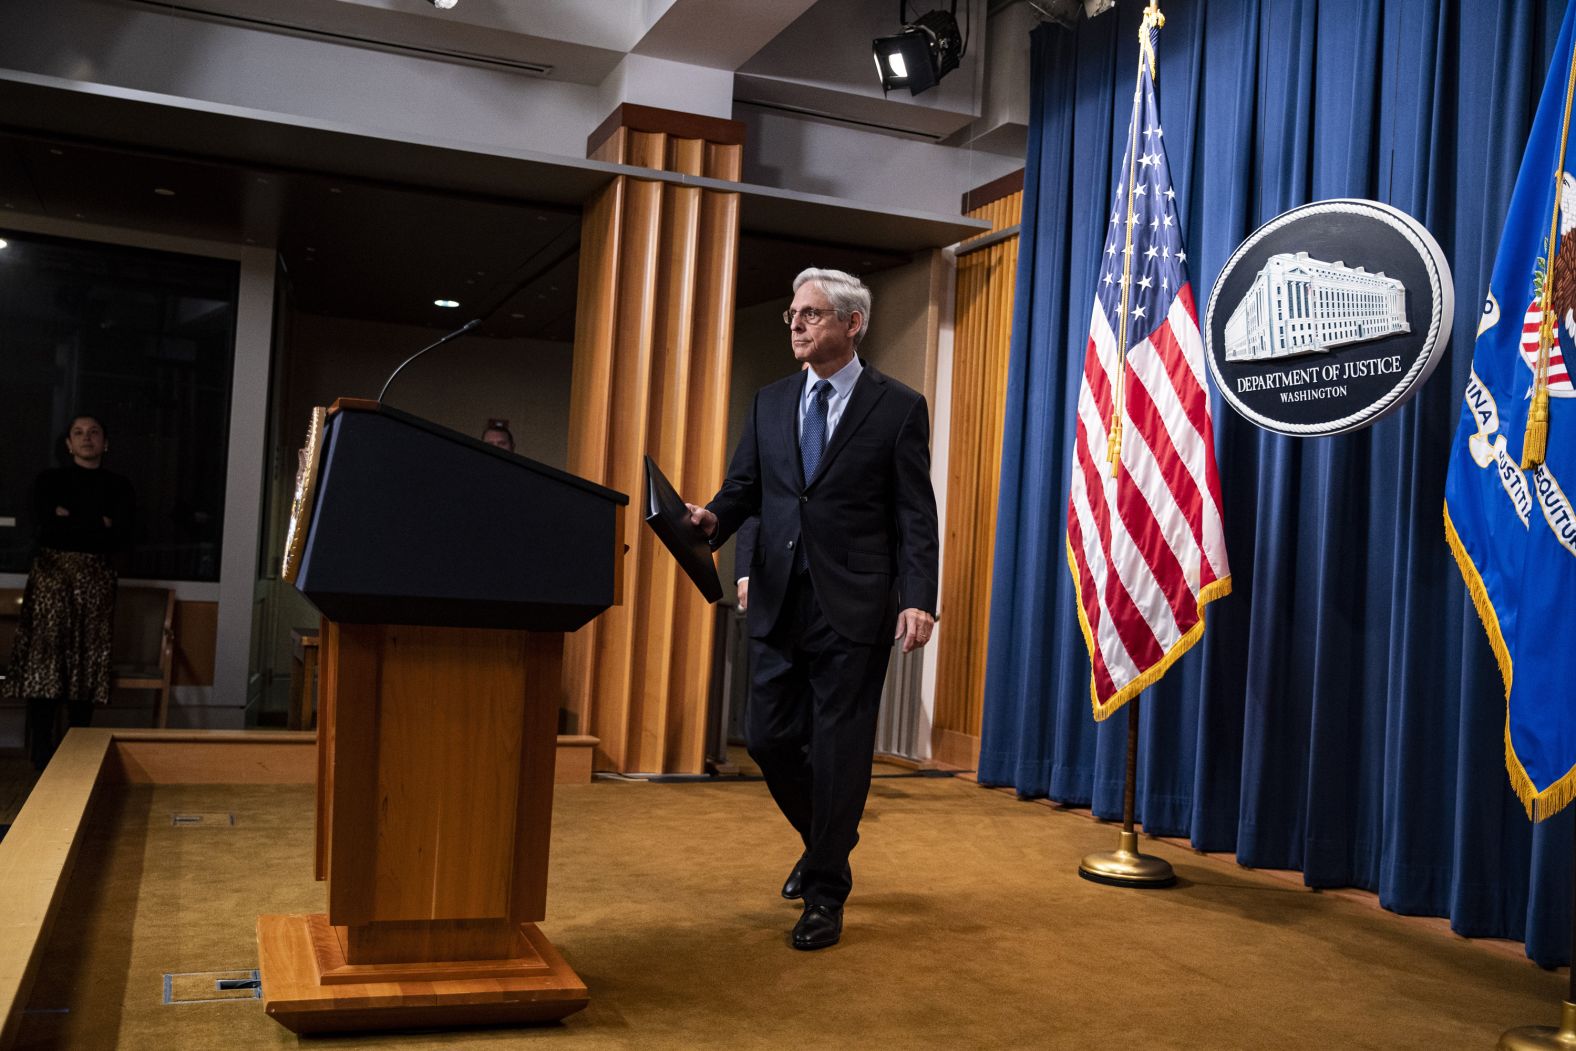 US Attorney General Merrick Garland arrives to speak at the Department of Justice in Washington, DC, on Thursday, January 12. Garland announced that he has <a href="index.php?page=&url=https%3A%2F%2Fwww.cnn.com%2F2023%2F01%2F12%2Fpolitics%2Fjoe-biden-classified-documents-counsels-office%2Findex.html" target="_blank">appointed a special counsel</a> to take over the investigation into the Obama-era classified documents found at President Joe Biden's home and former private office. Biden said the documents at his home were in a "locked garage" and that he was cooperating fully with the Department of Justice.